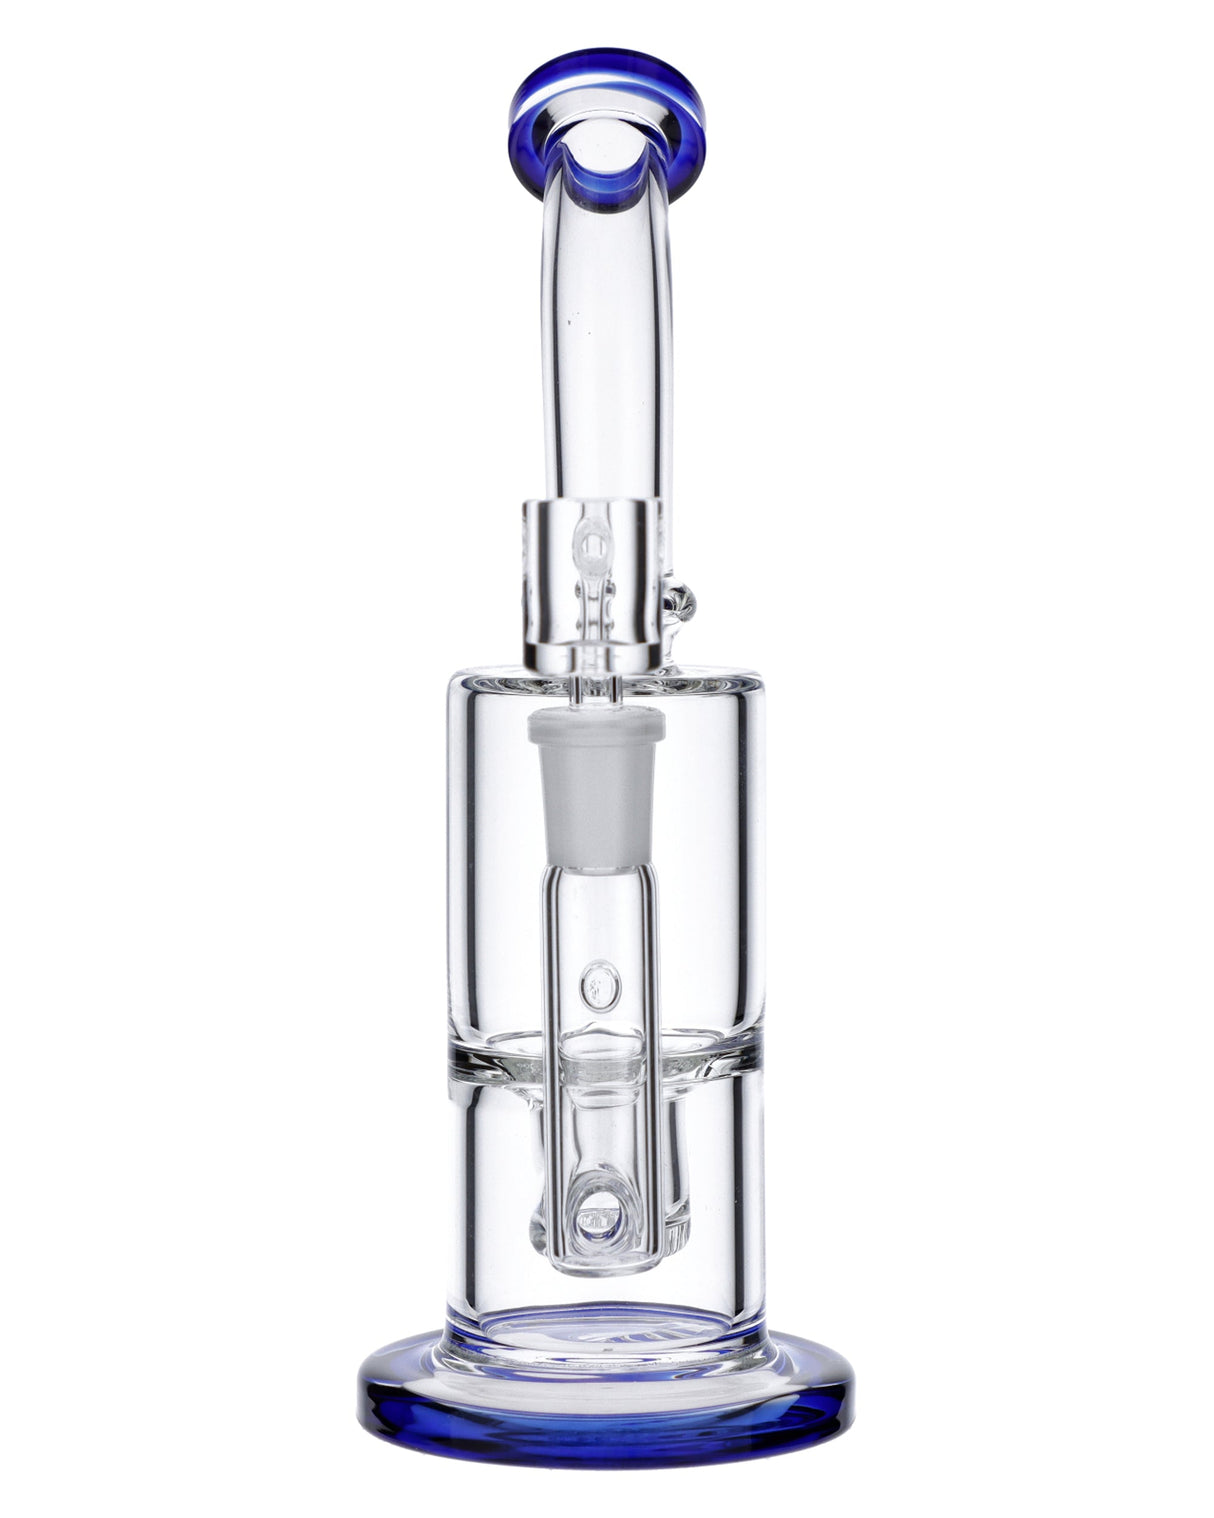 Blue Glass Bubbler Rig by Valiant Distribution, 8 Inch with 90 Degree Joint, Front View on White Background